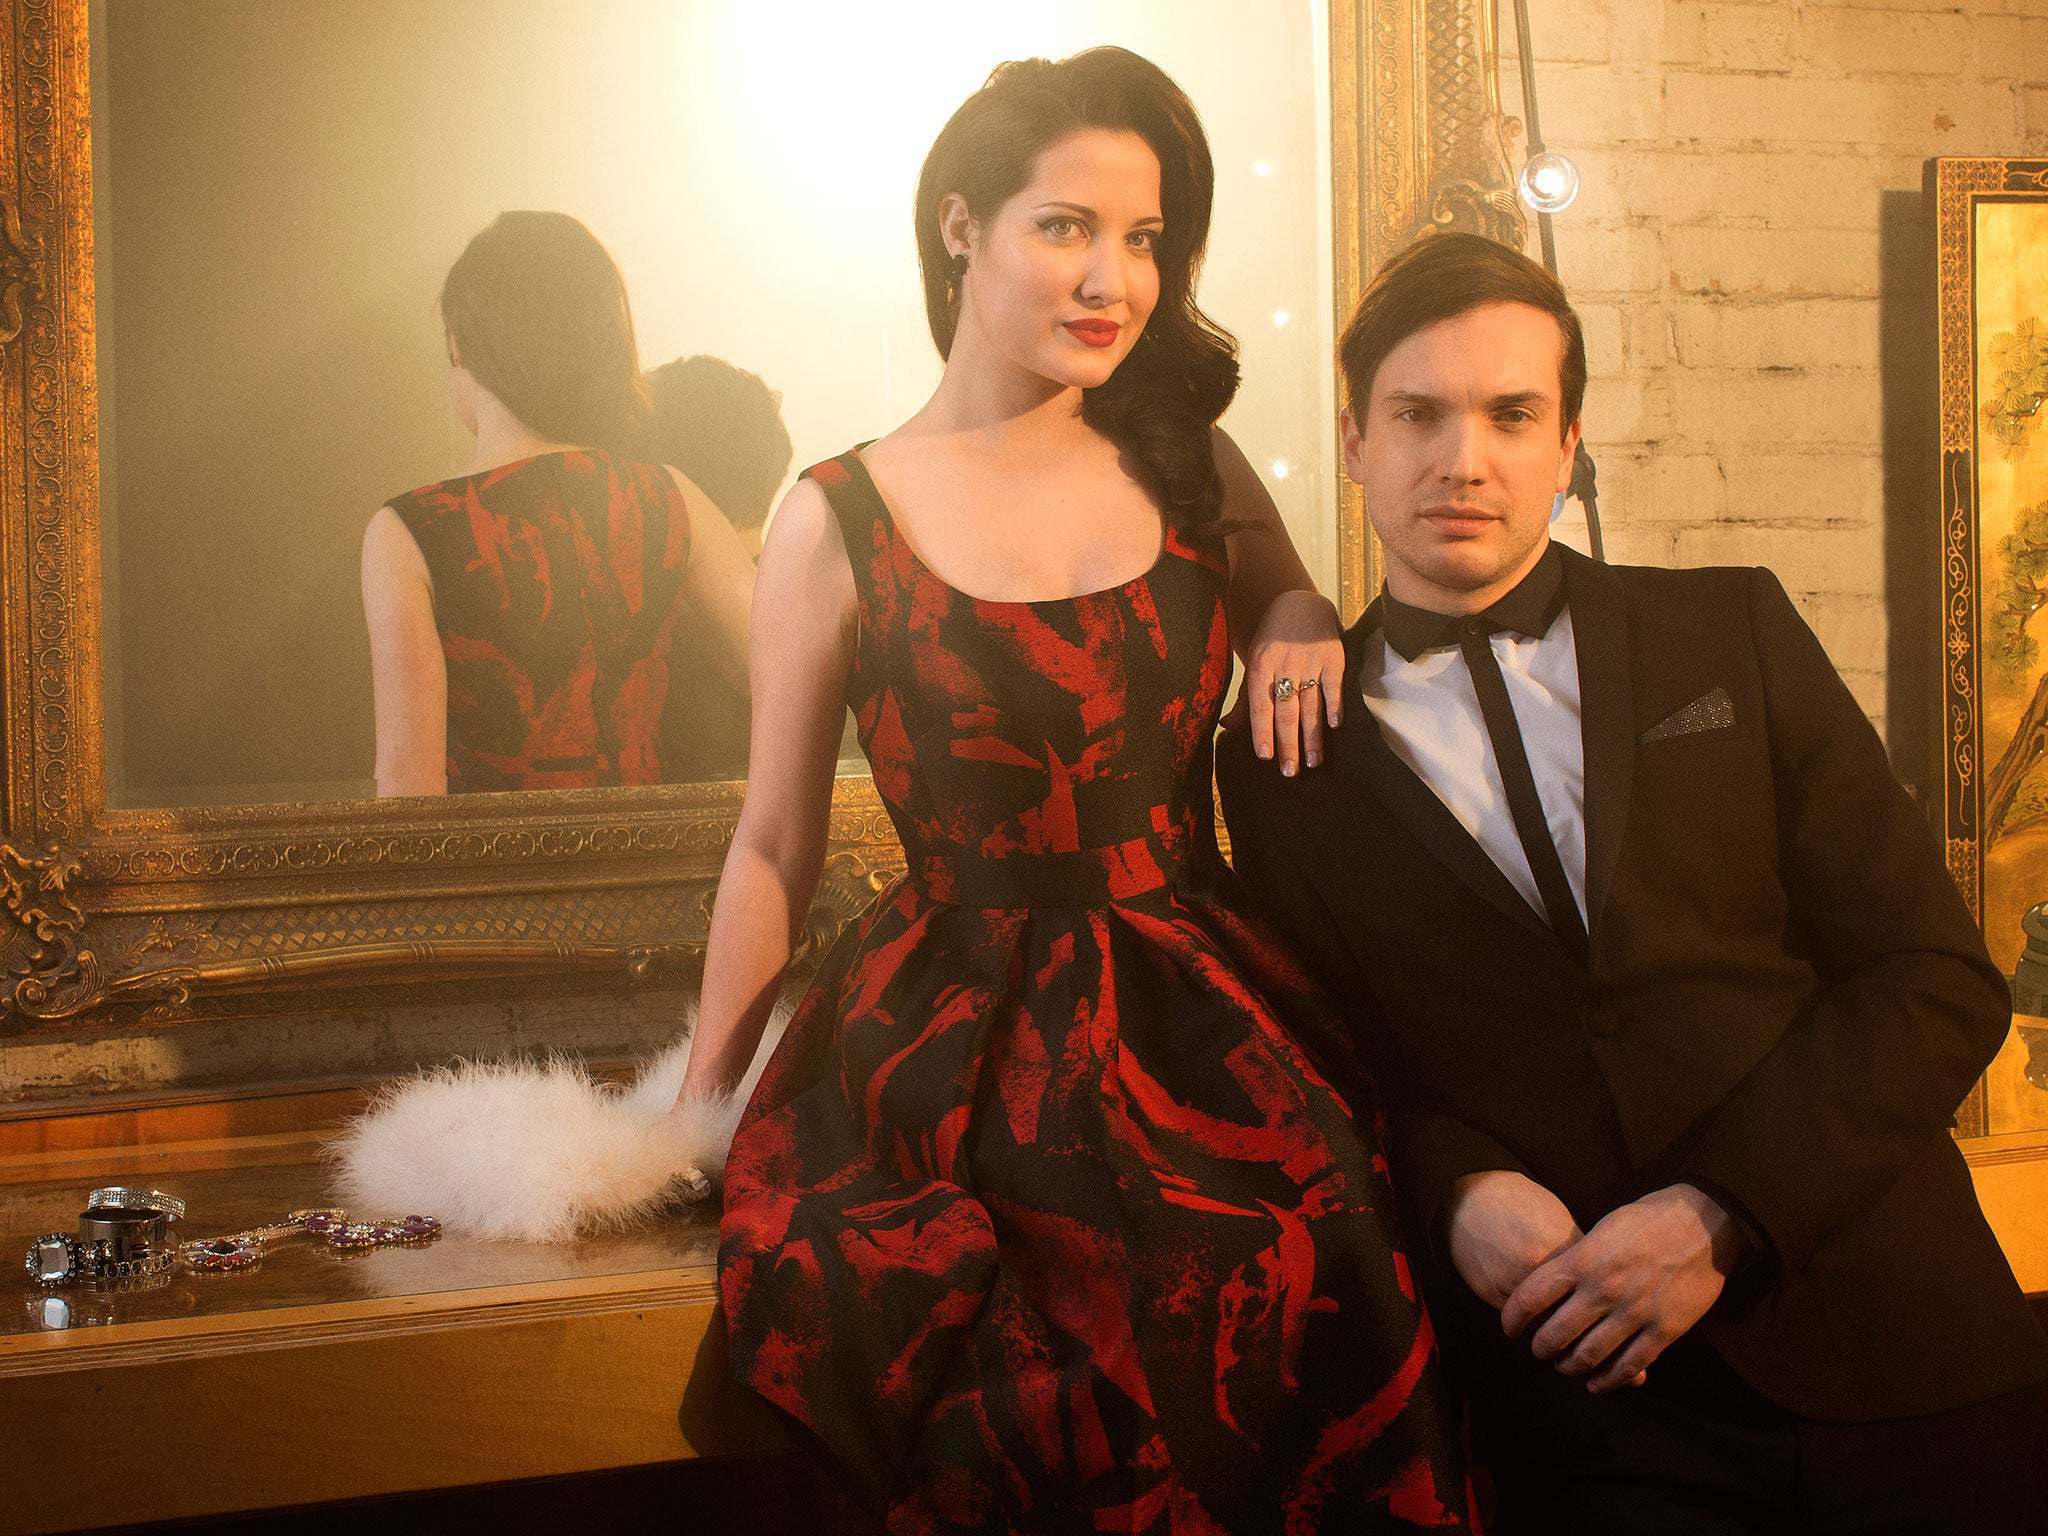 Alex Larke and Bianca Nicholas of Electro Velvet will represent the UK at Eurovision 2015